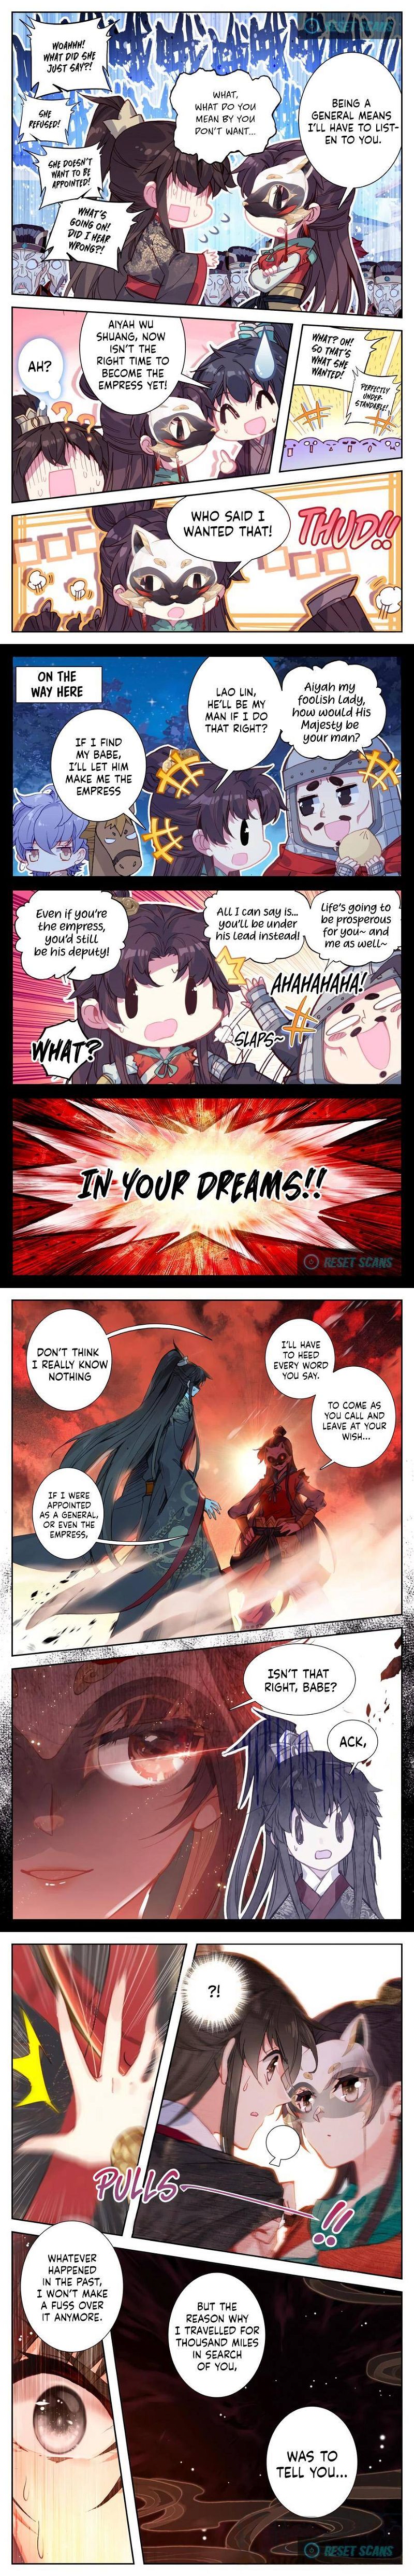 Legend of the Tyrant Empress Chapter 83 page 2